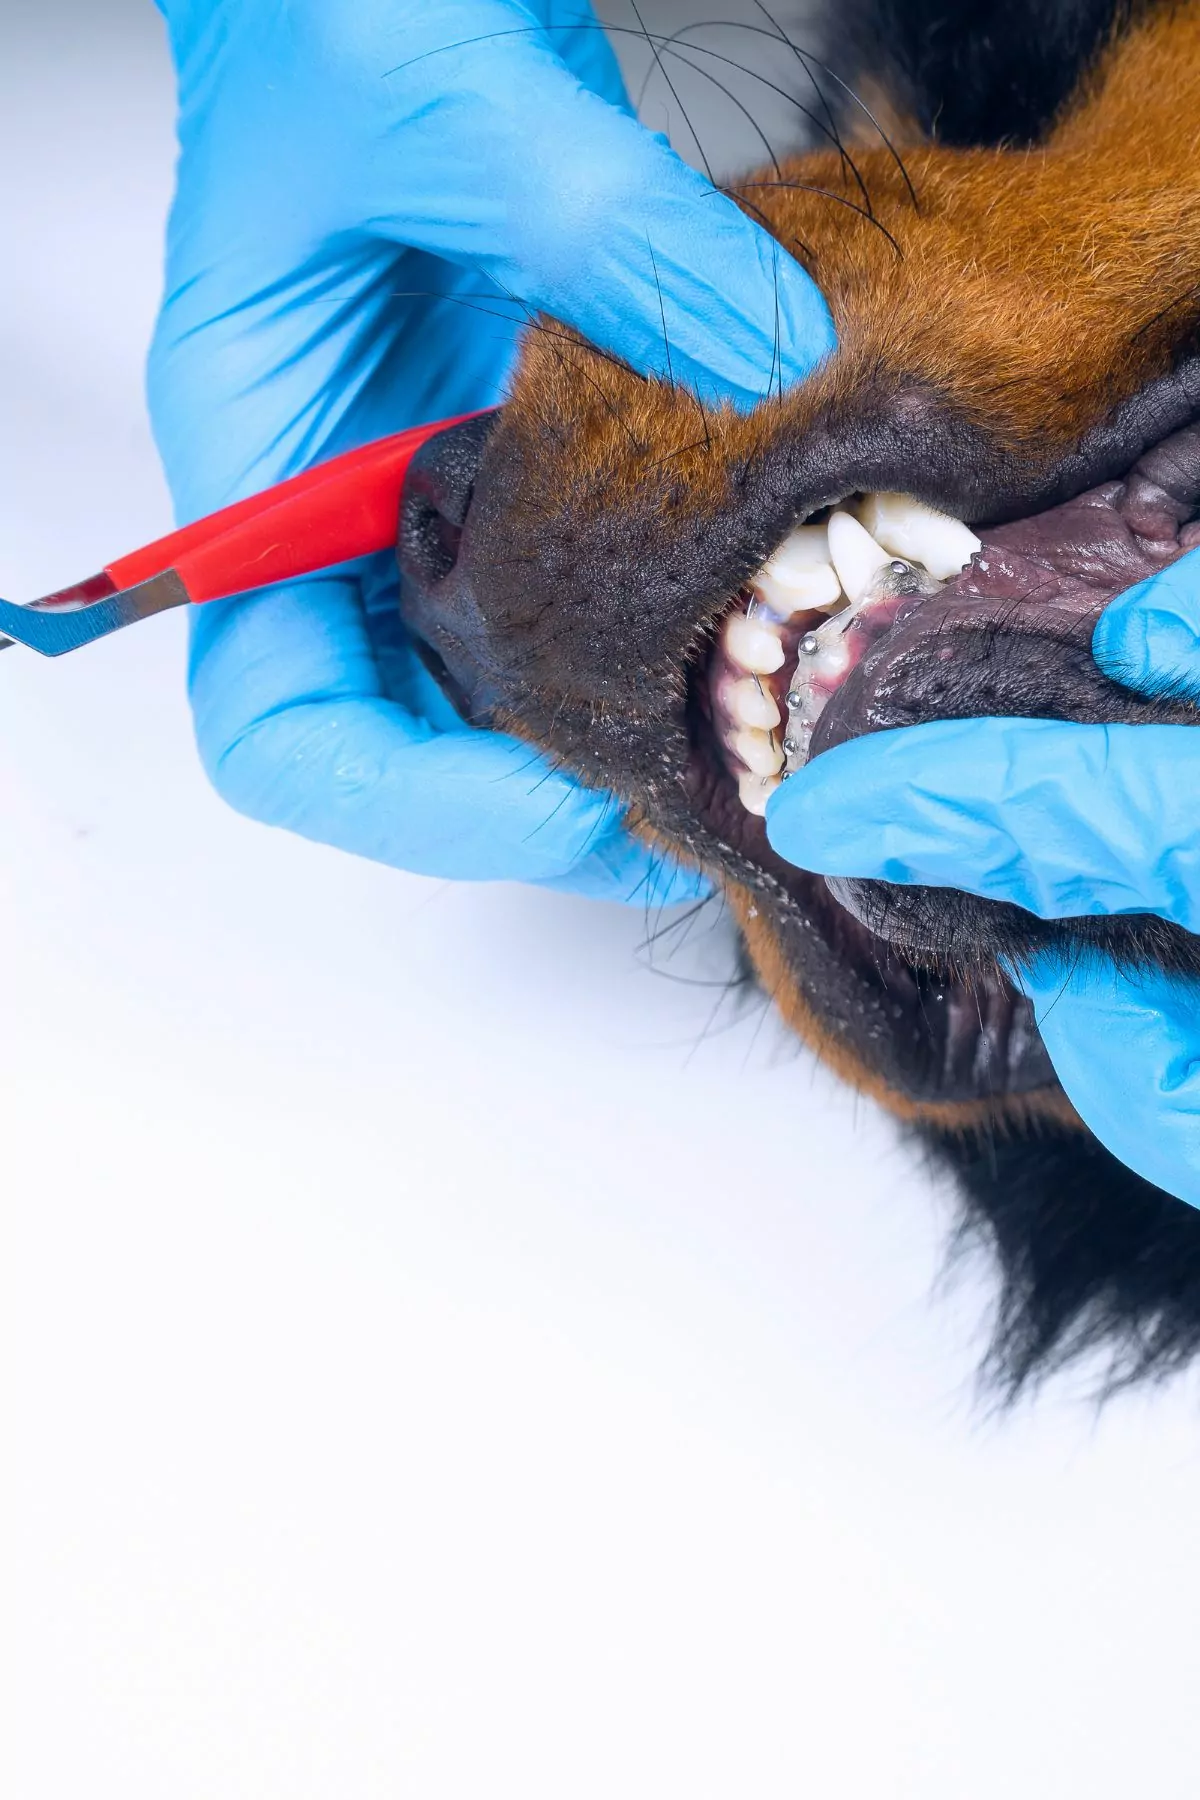 Vet is cleaning the braces of a dog